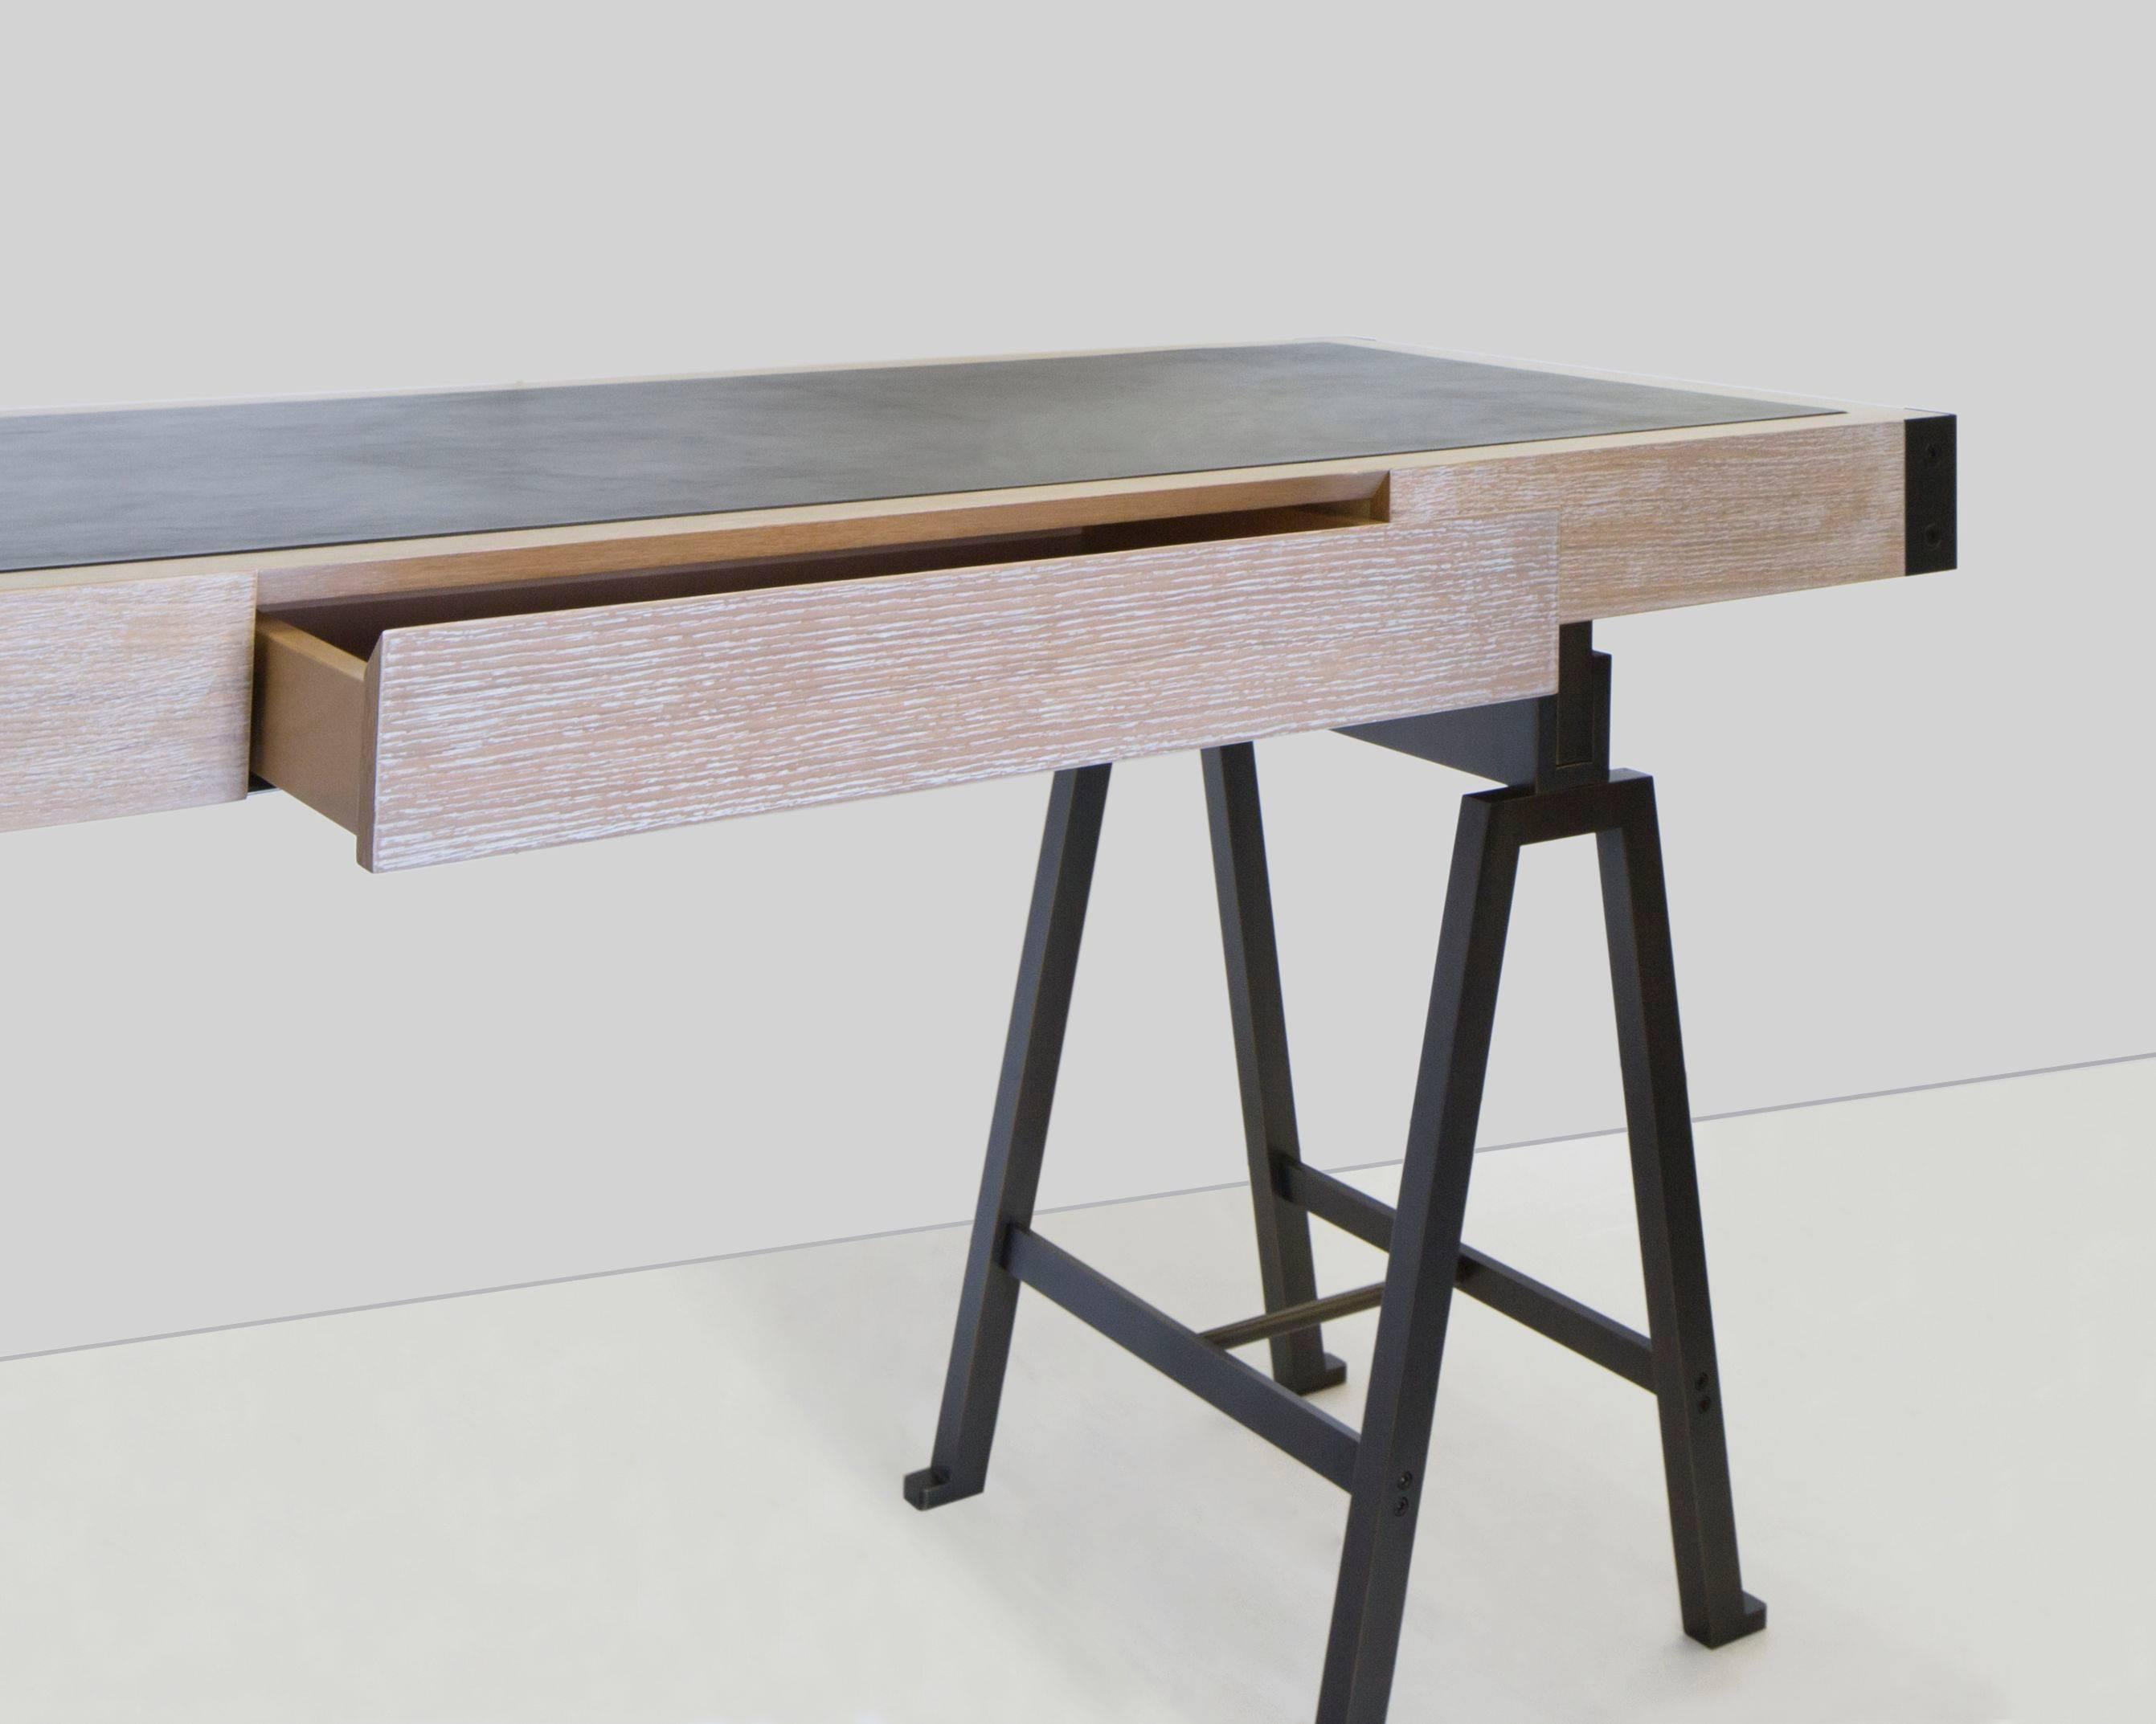 American Bronze and Limed Oak Desk with Leather Top by Mark Zeff